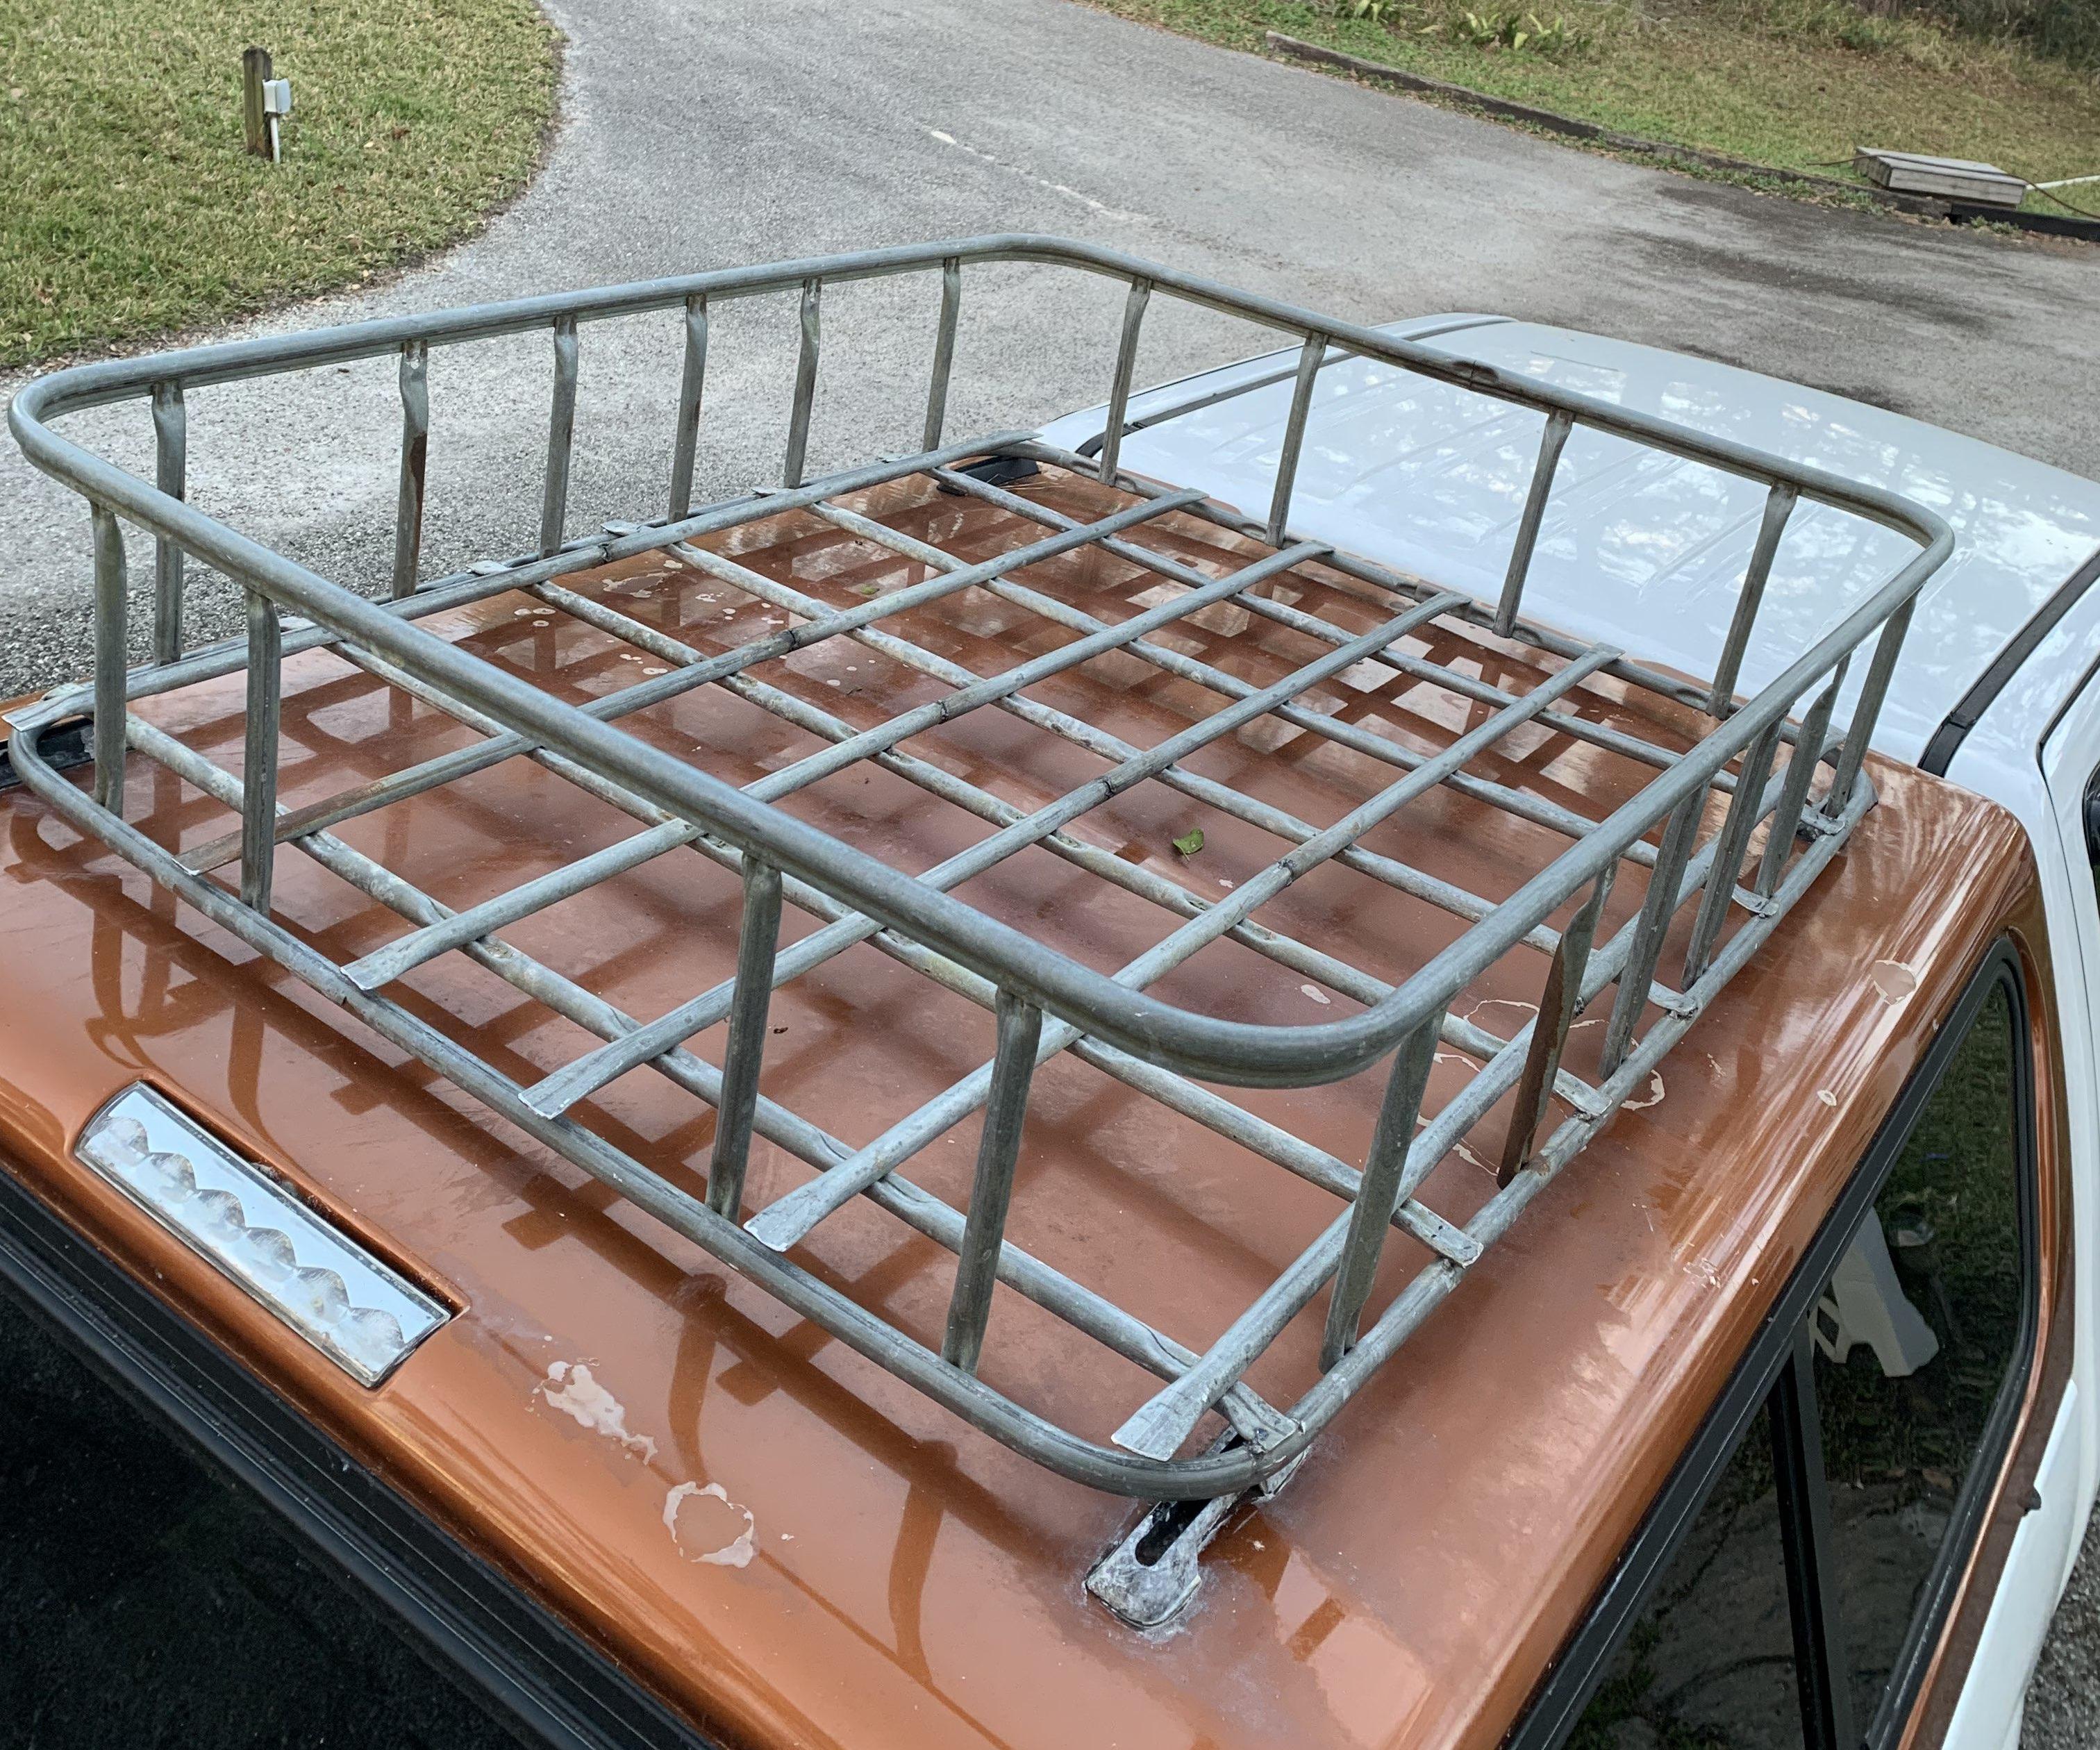 IBC Tote Roof Rack/Cargo Carrier DIY